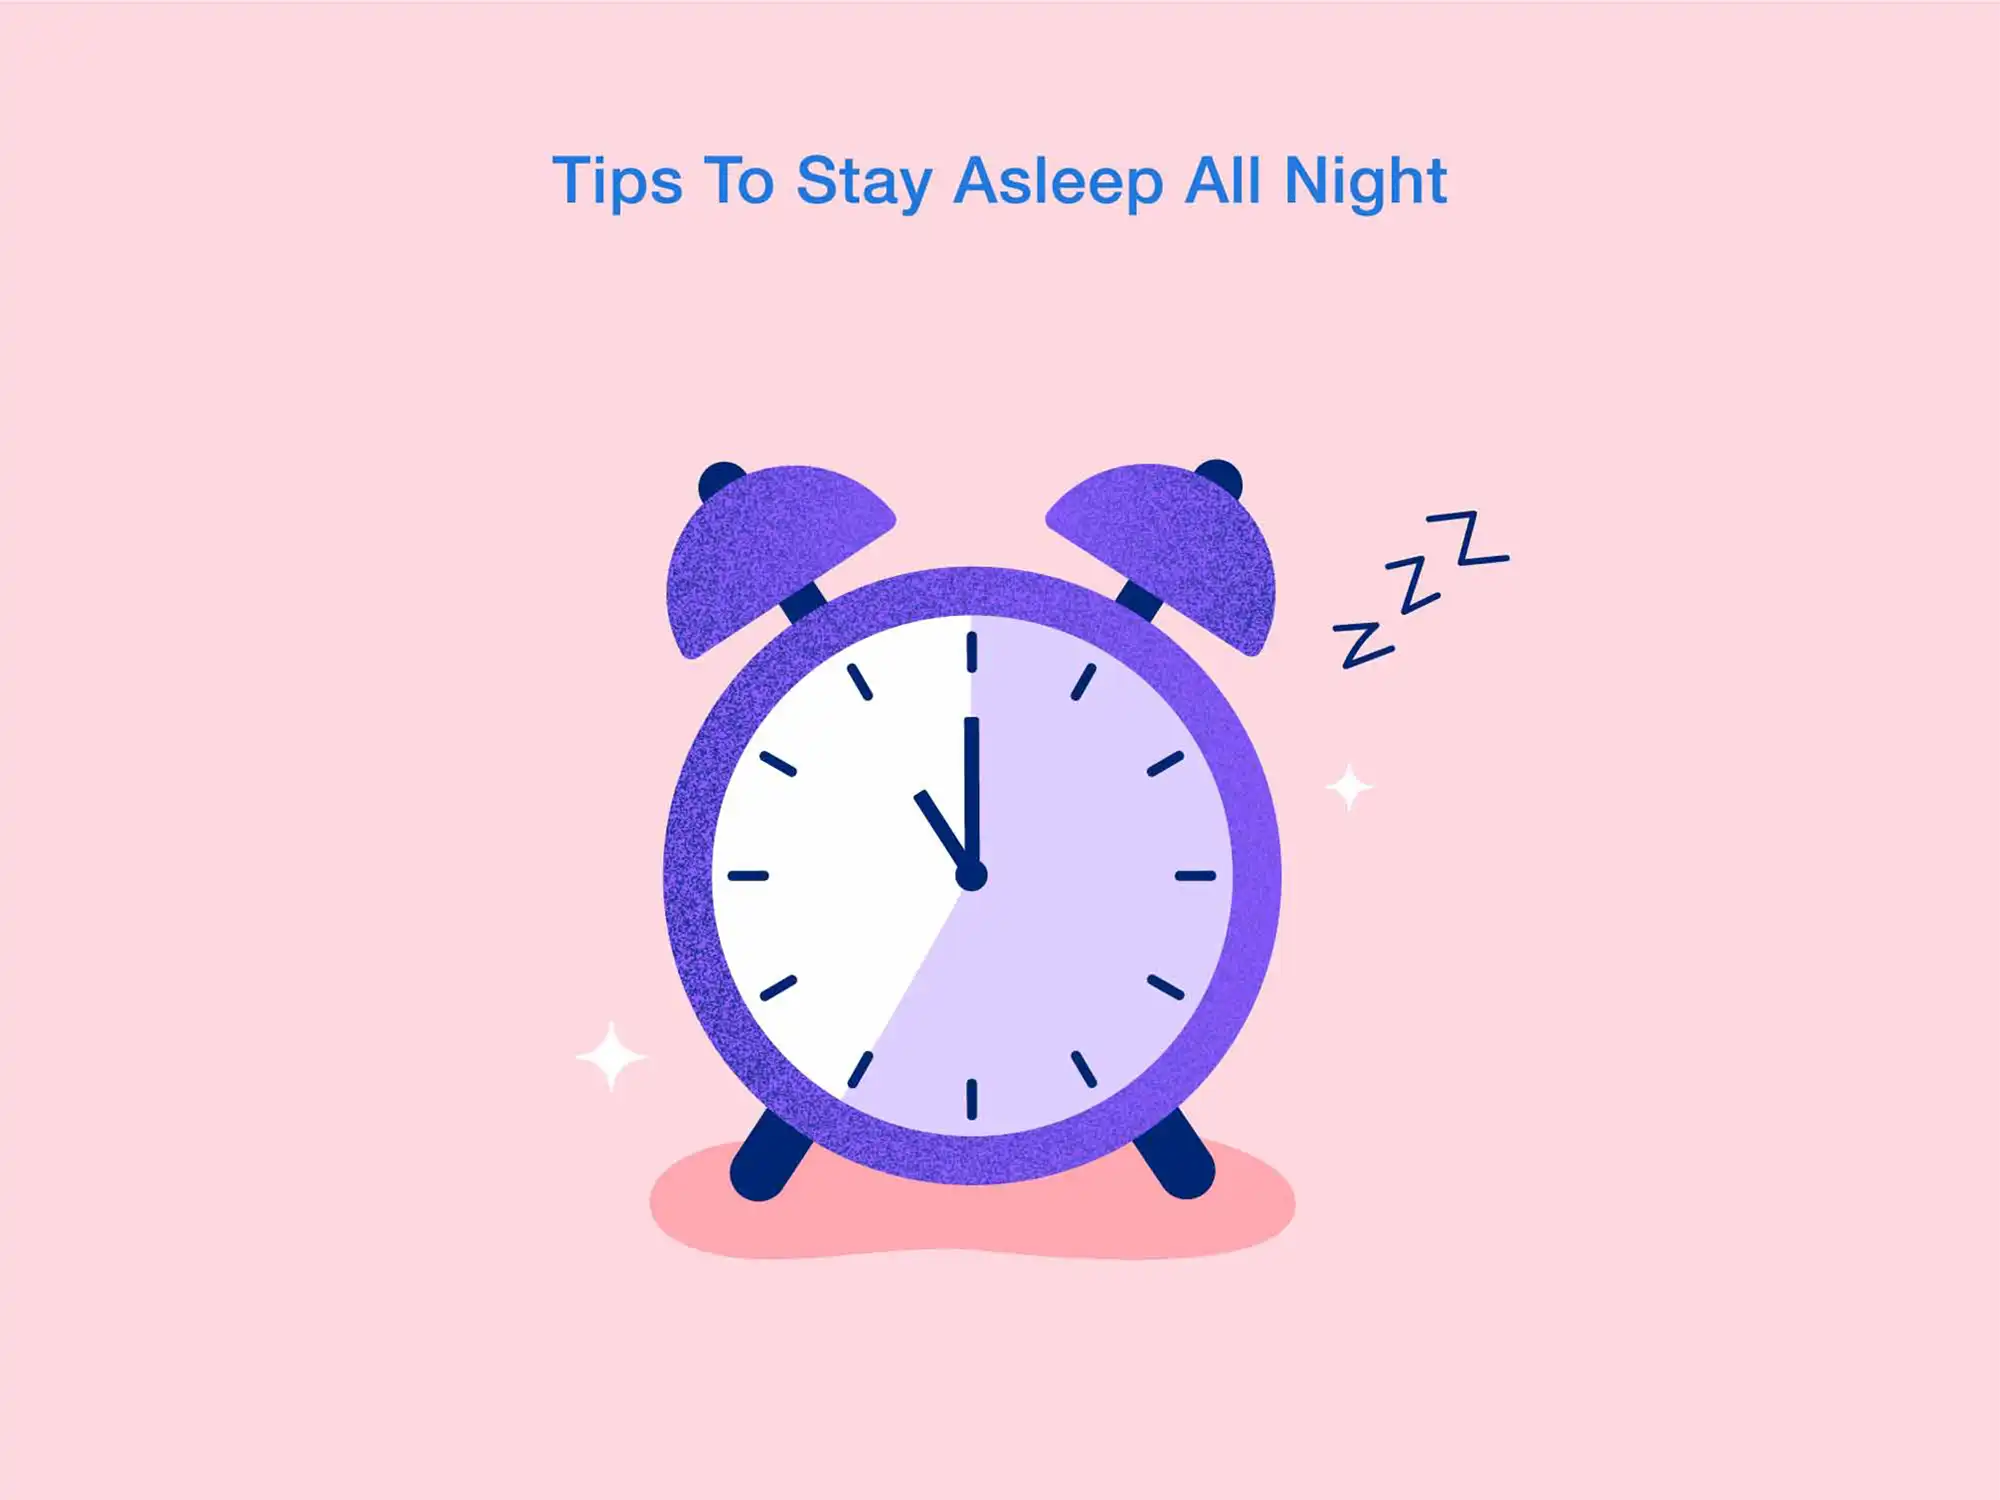 Tips to Stay Asleep All Night